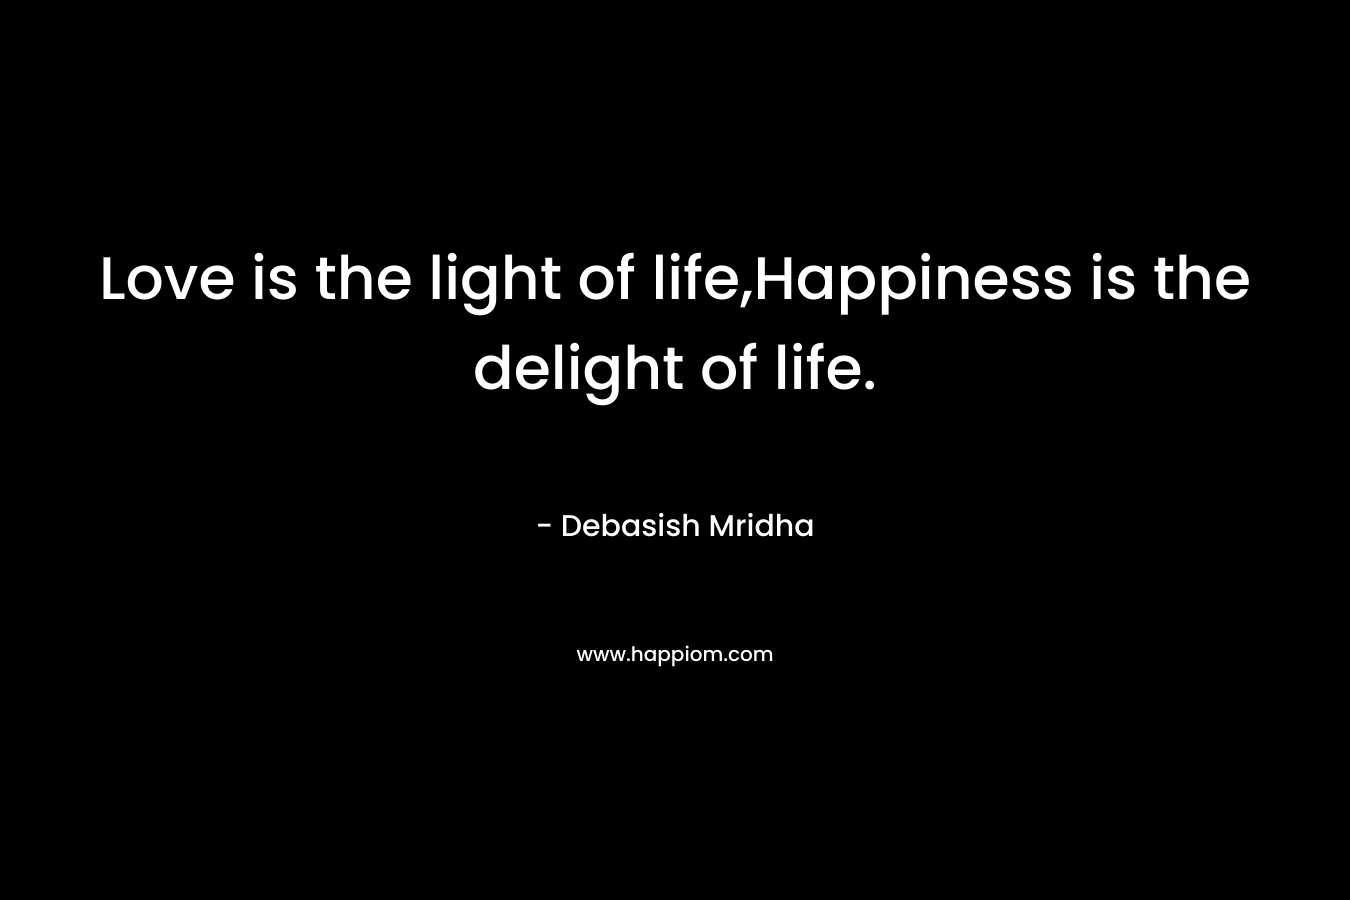 Love is the light of life,Happiness is the delight of life.